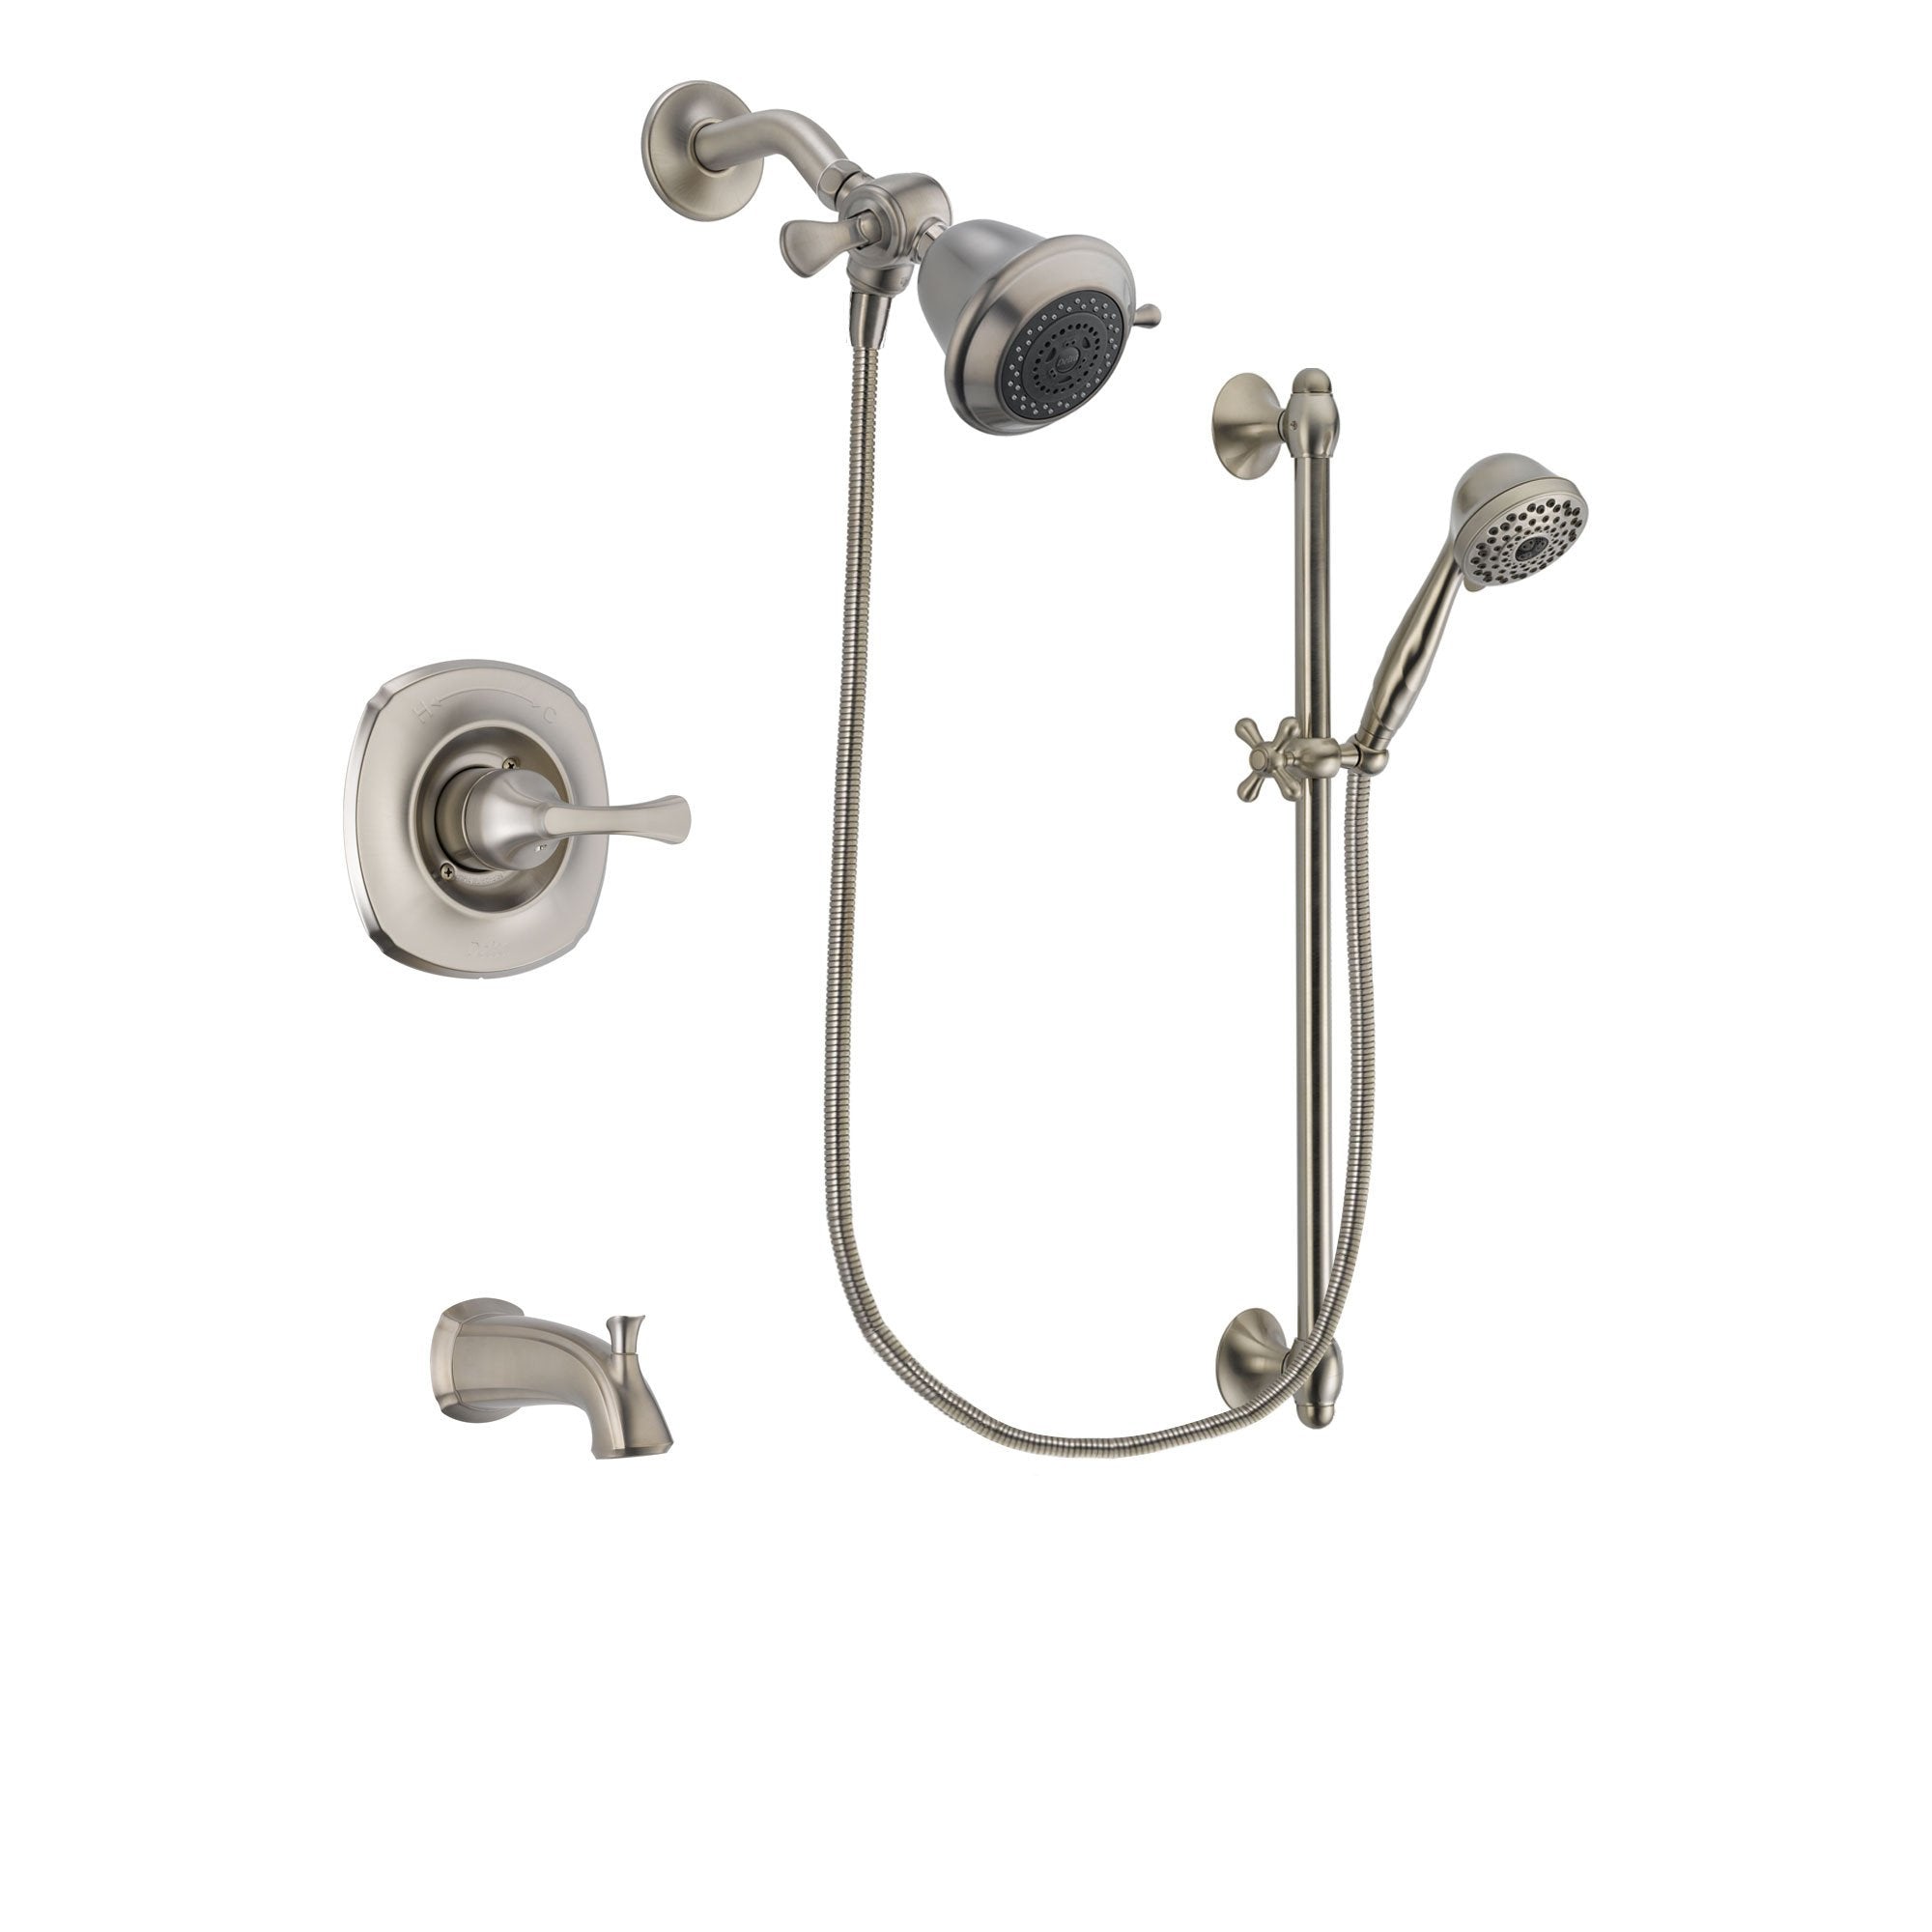 Delta Addison Stainless Steel Finish Tub and Shower Faucet System Package with Shower Head and 7-Spray Handheld Shower with Slide Bar Includes Rough-in Valve and Tub Spout DSP1665V